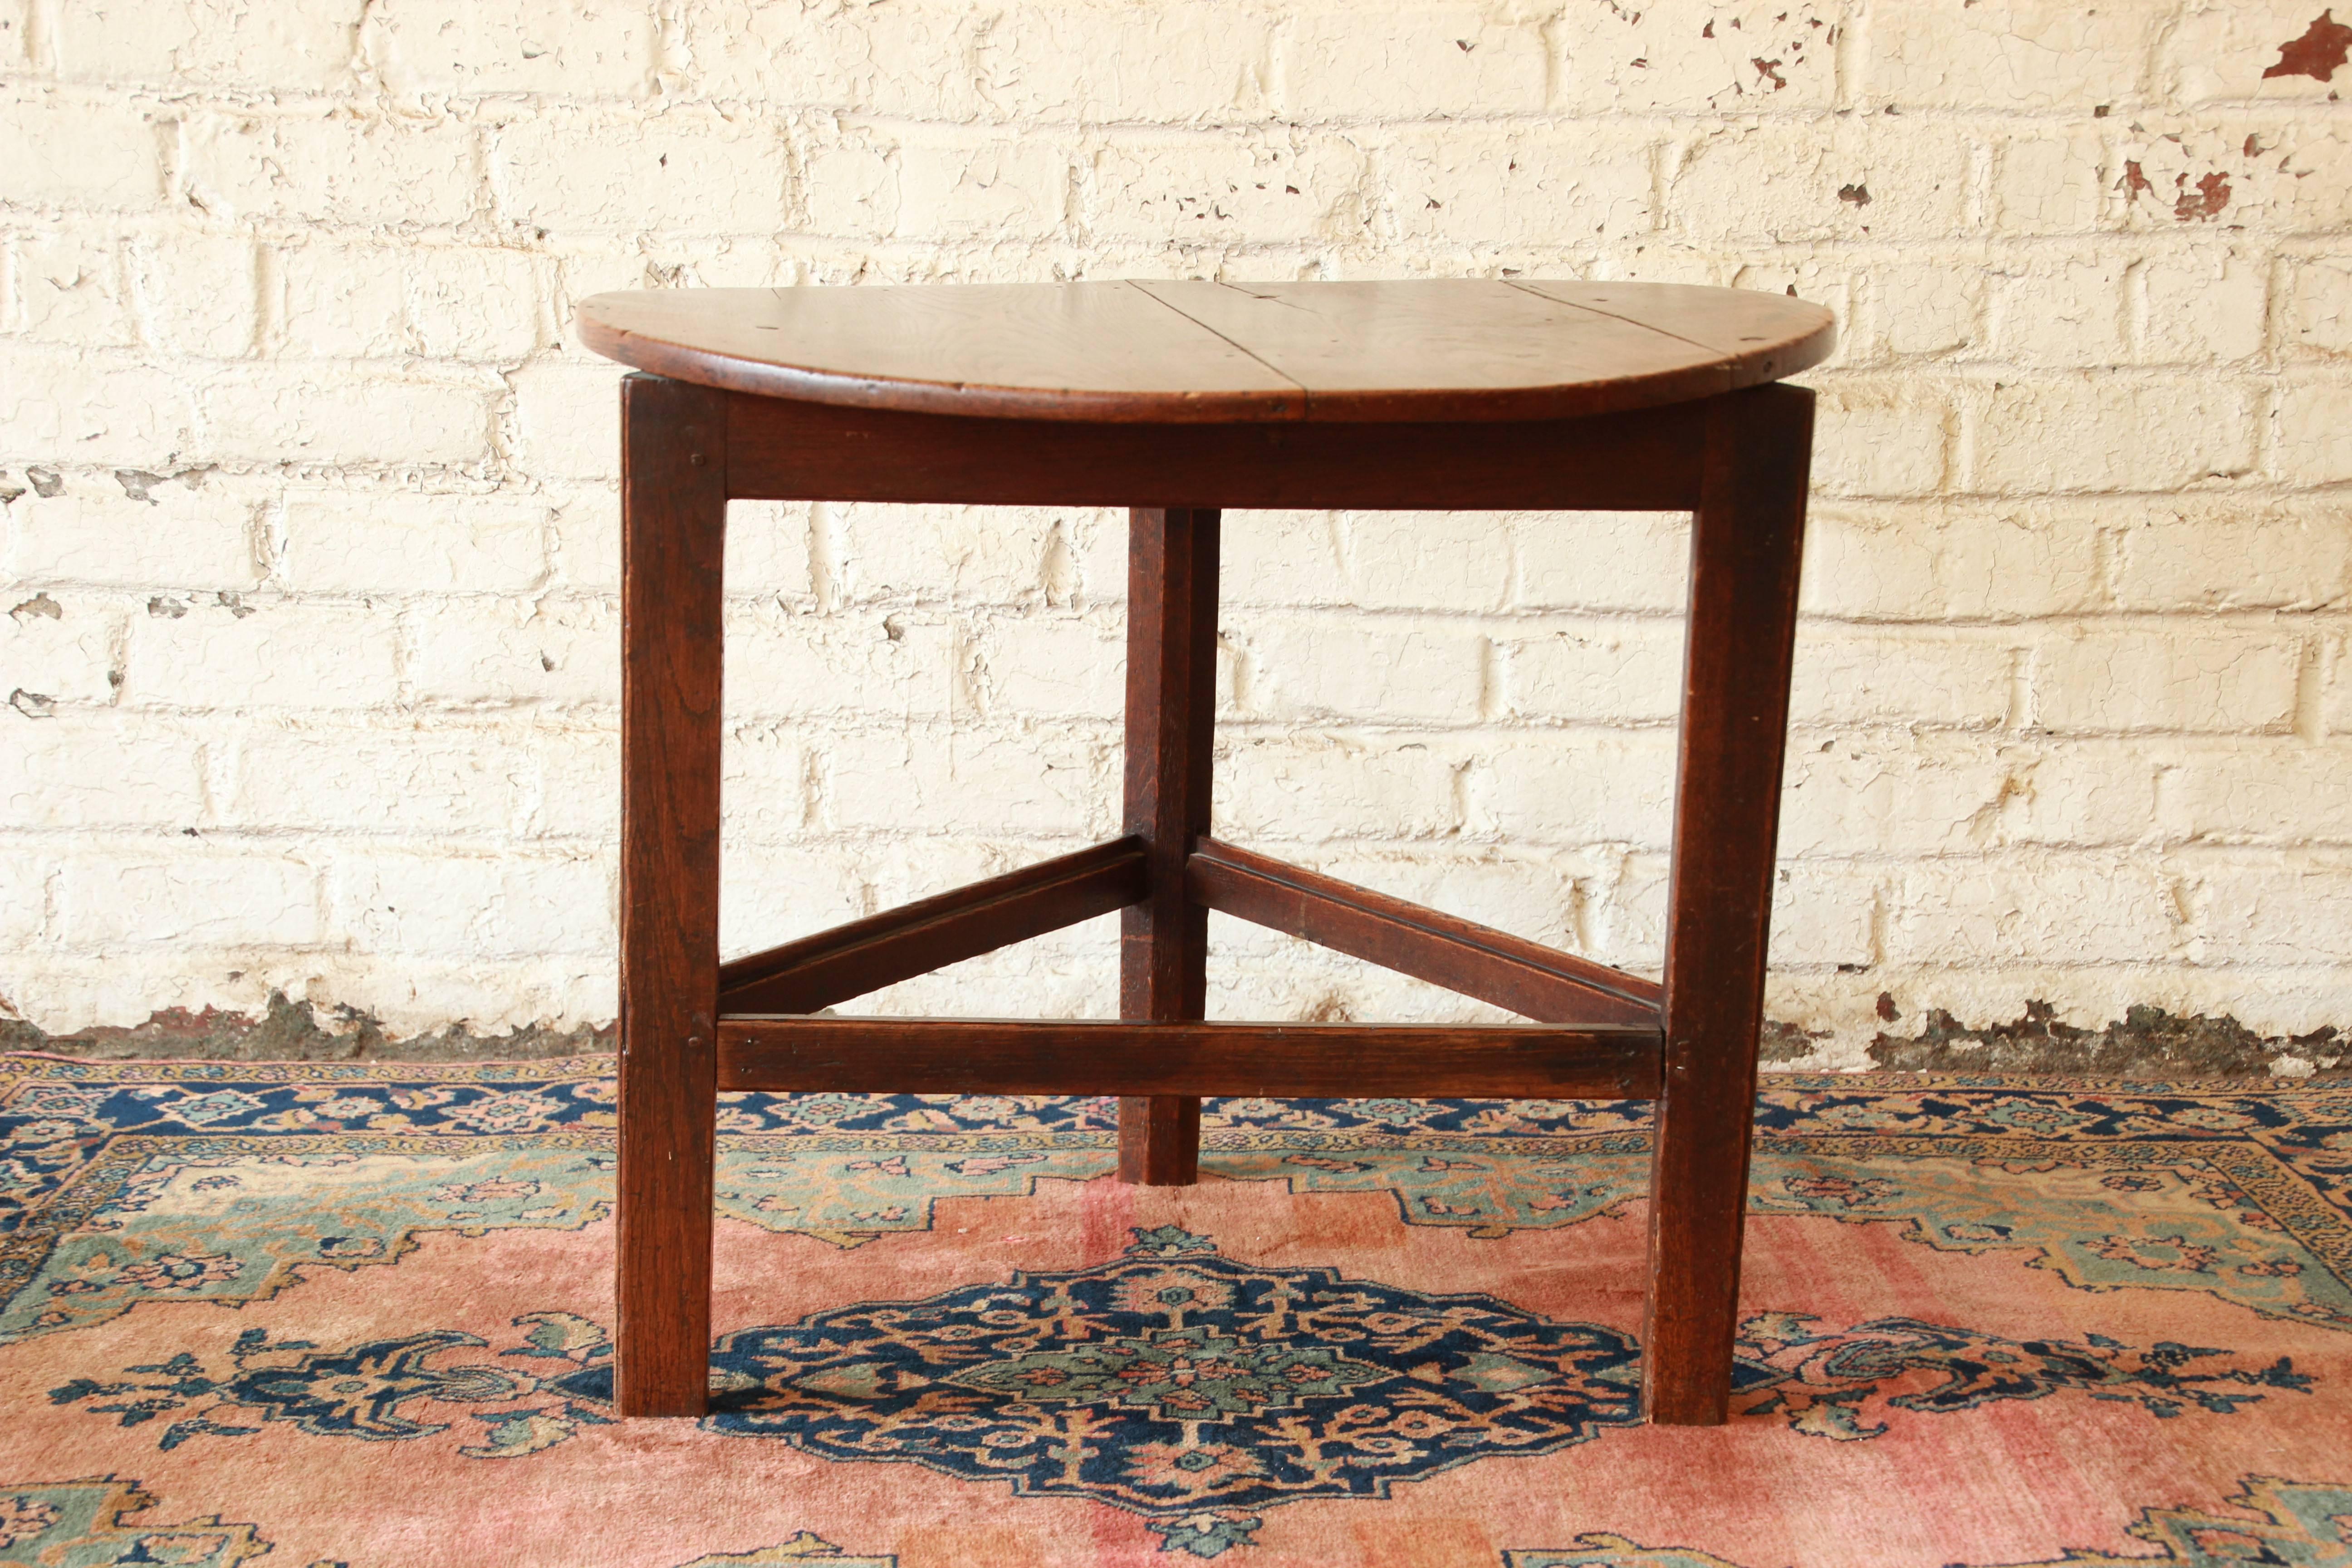 A very rare and unique 18th century English oak tavern table. The table features an original rustic oak finish. It has a round top and a triangle base. The table is well built from solid oak. The top has some cracks in it and bows slightly upward